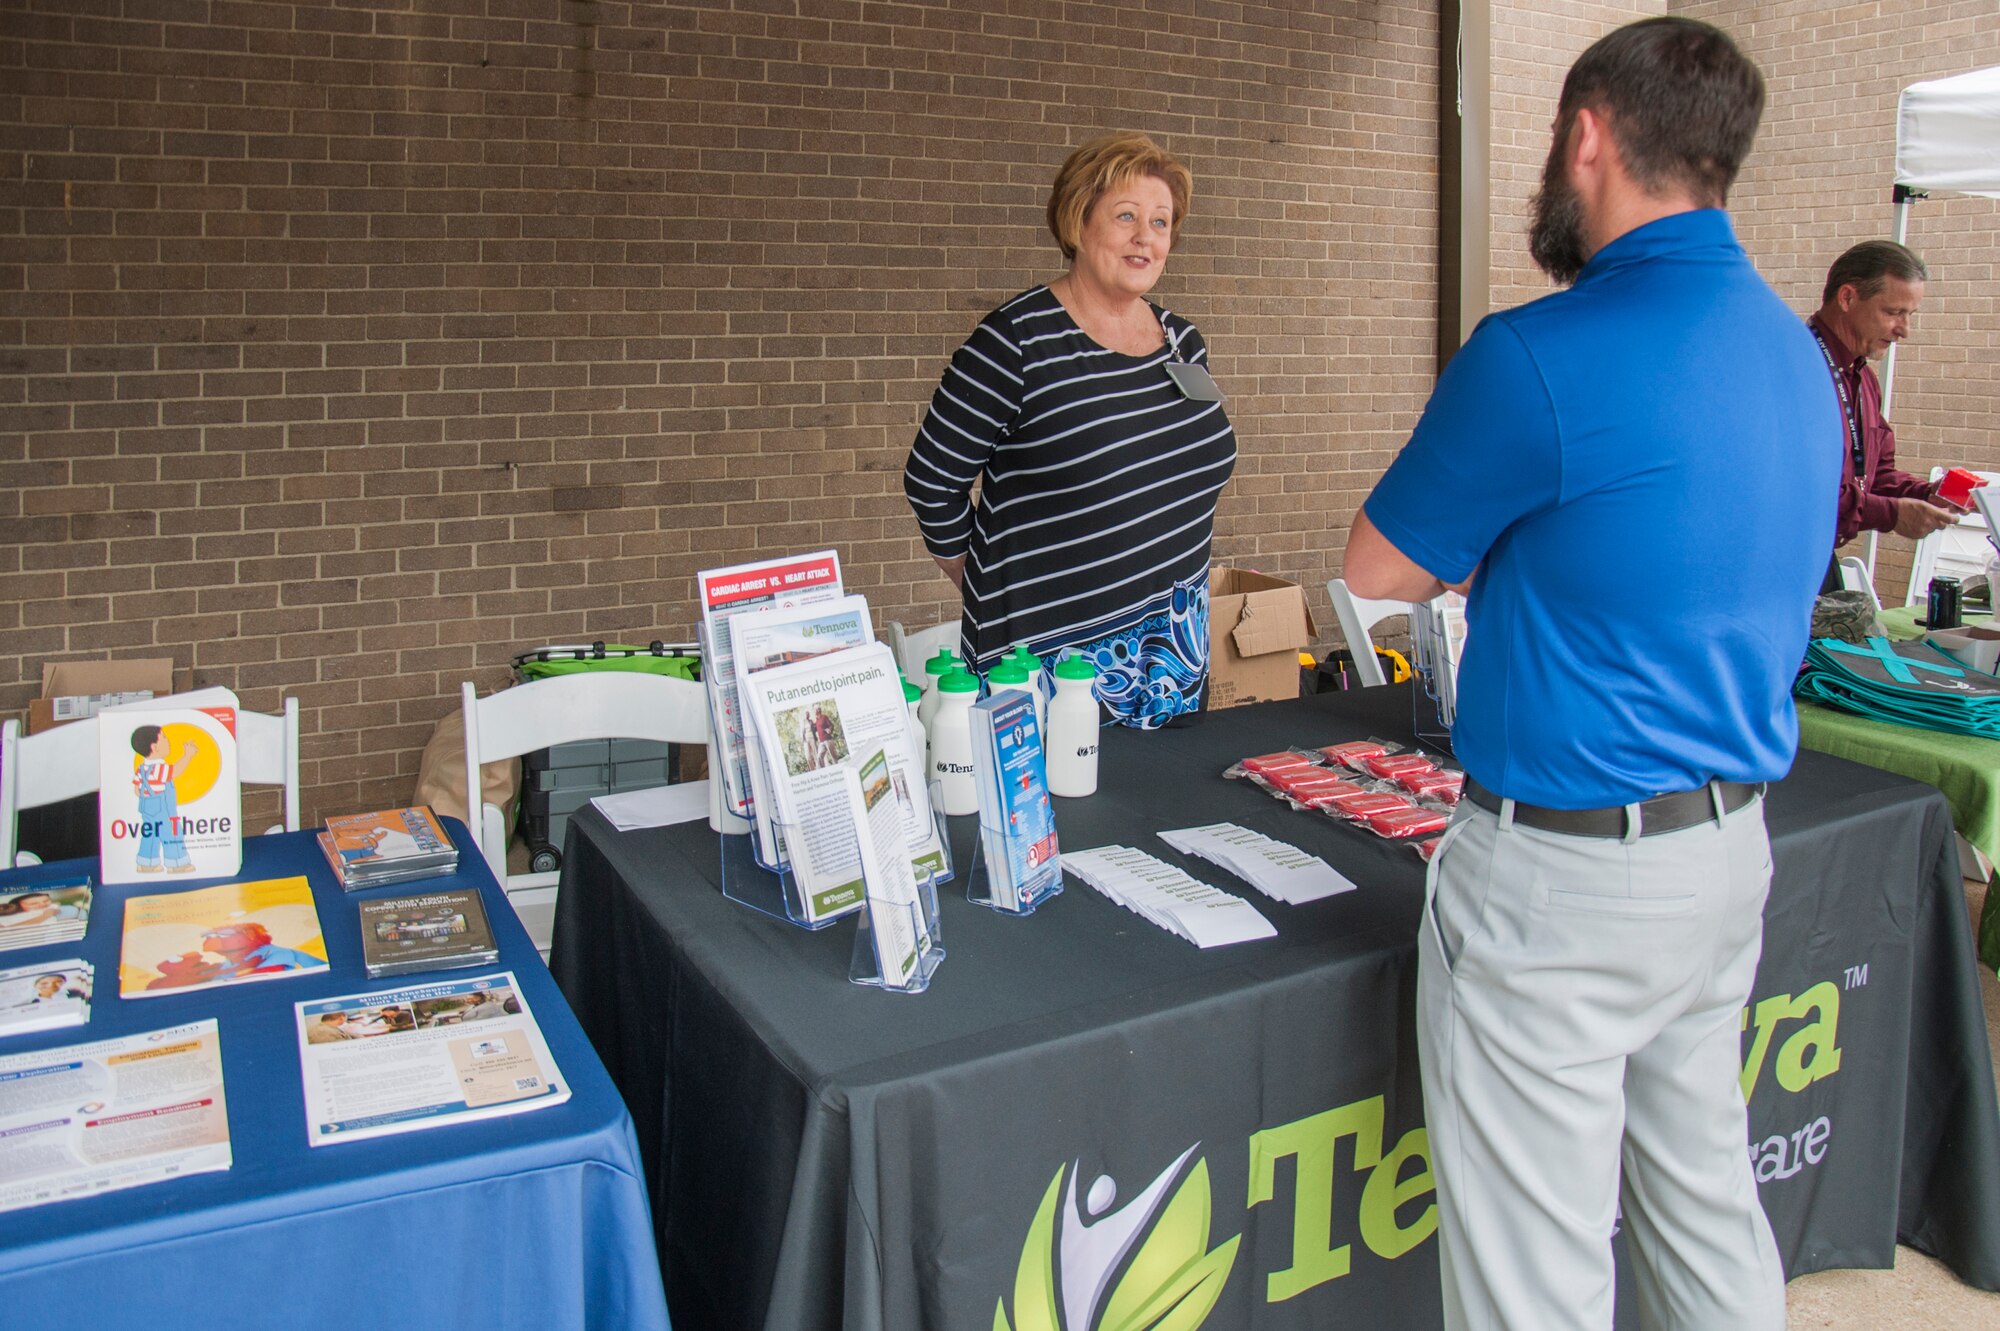 Ava Lynch, representative with Tennova Healthcare, speaks to one of the attendees about the healthcare services offered by her organization during the Arnold Air Force Base Community Health Fair on June 1 at the Base Exchange and Commissary.  (U.S. Air Force photos/Jacqueline Cowan)